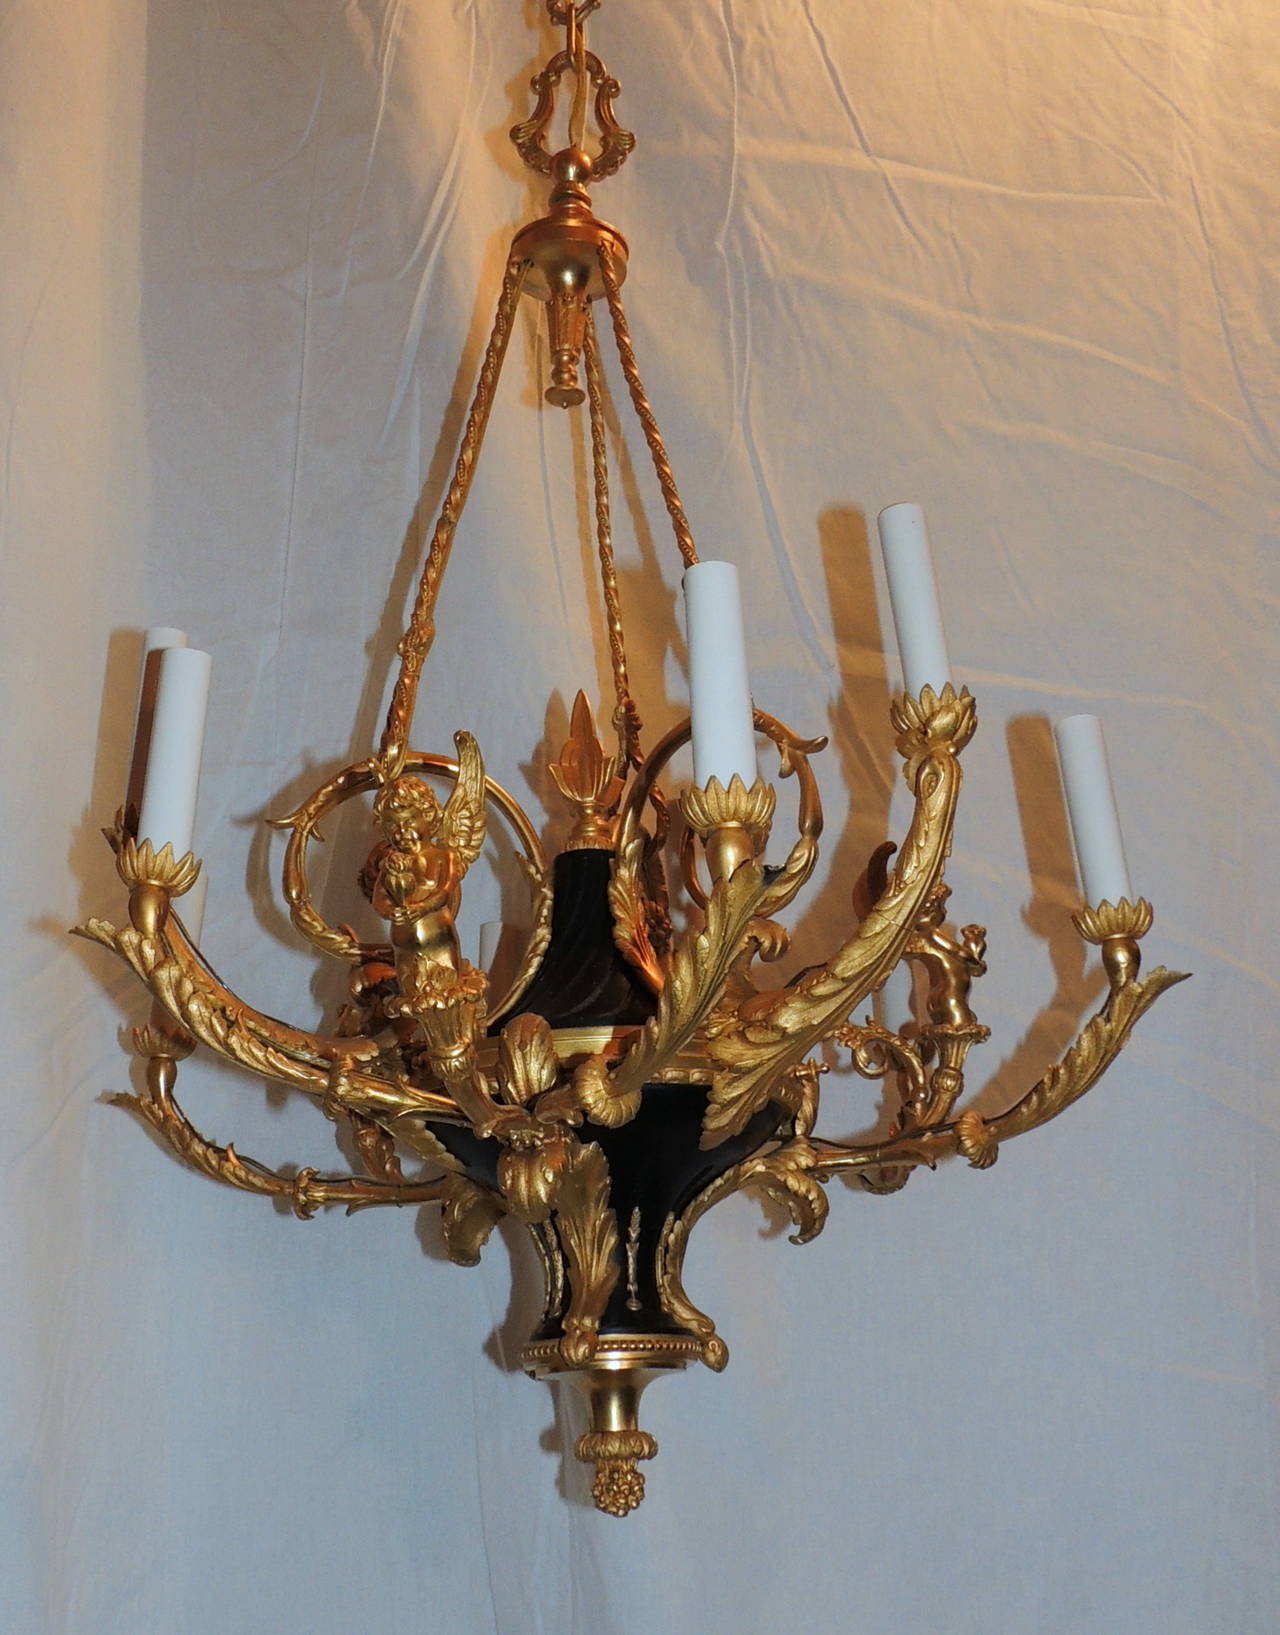 A wonderful 19 century French Dore Bronze chandelier with black carved marble center and beautiful gilt bronze scroll arms supporting the 3 winged cherubs holding a flower surrounded by 3 lights. The 9 lights allow this chandelier to produce light 